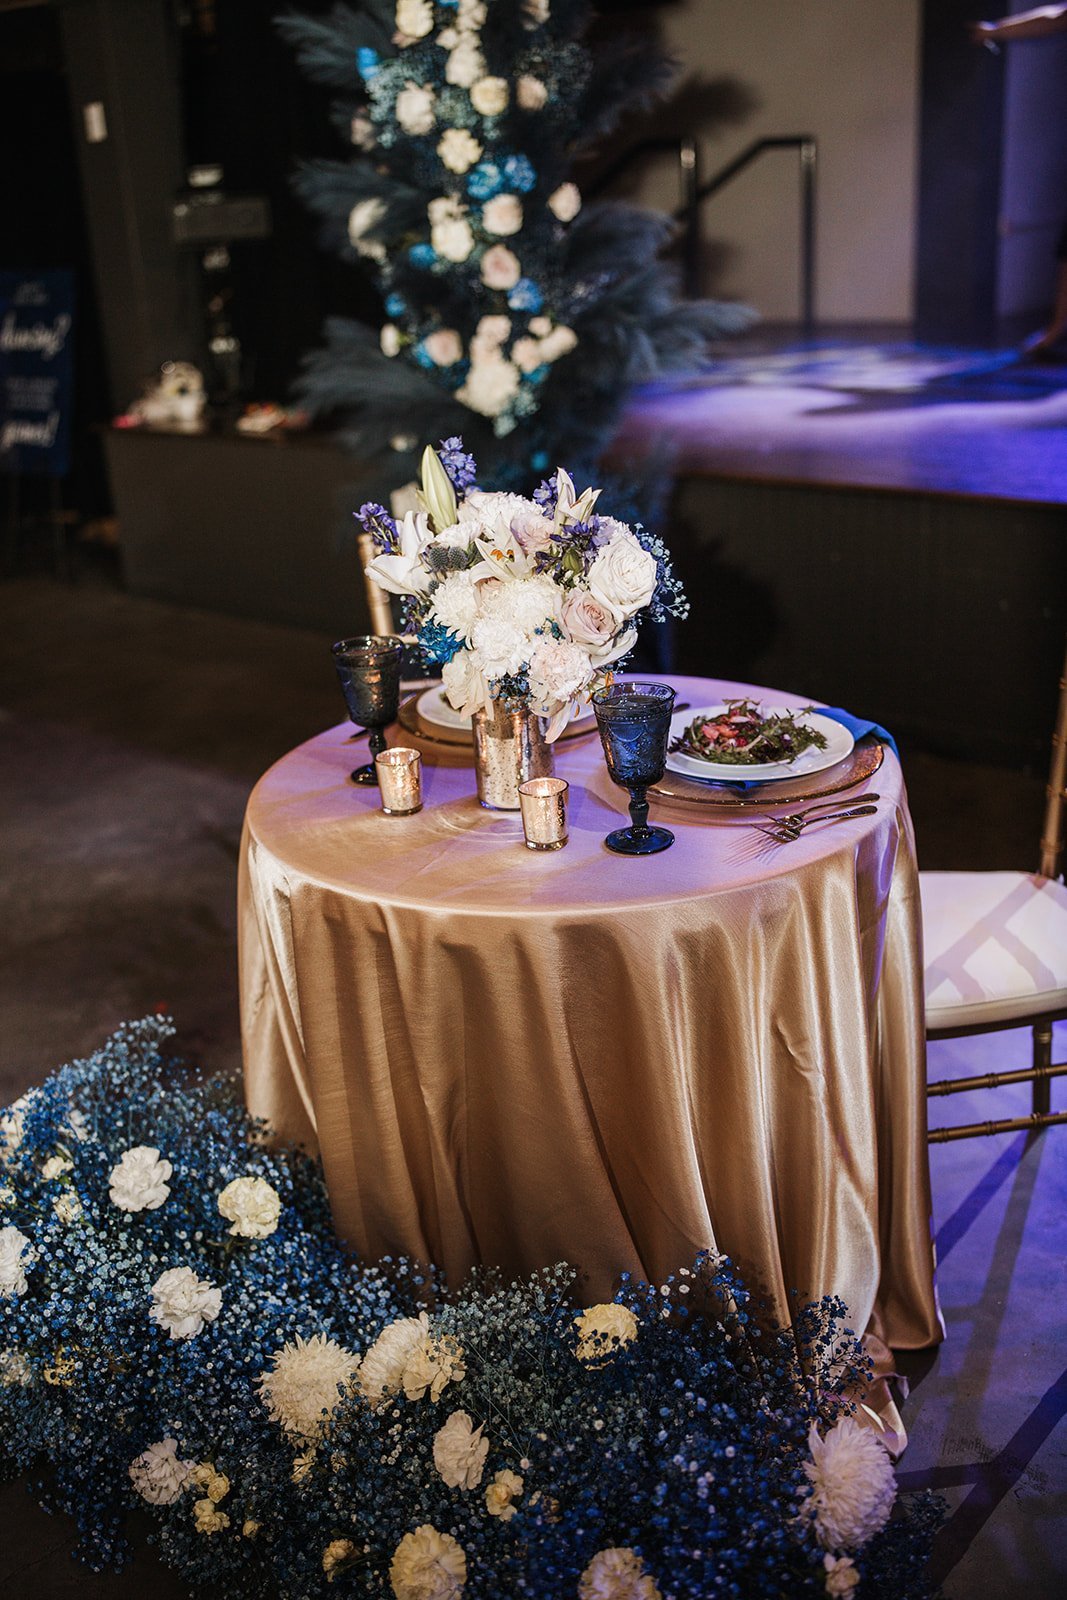 natalia-and-kelvins-starry-night-themed-wedding-at-victory-north-in-savannah-georgia-with-celestial-inspired-wedding-florals-designed-by-savannah-wedding-florist-ivory-and-beau-savannah-florist-savannah-wedding-2.jpg